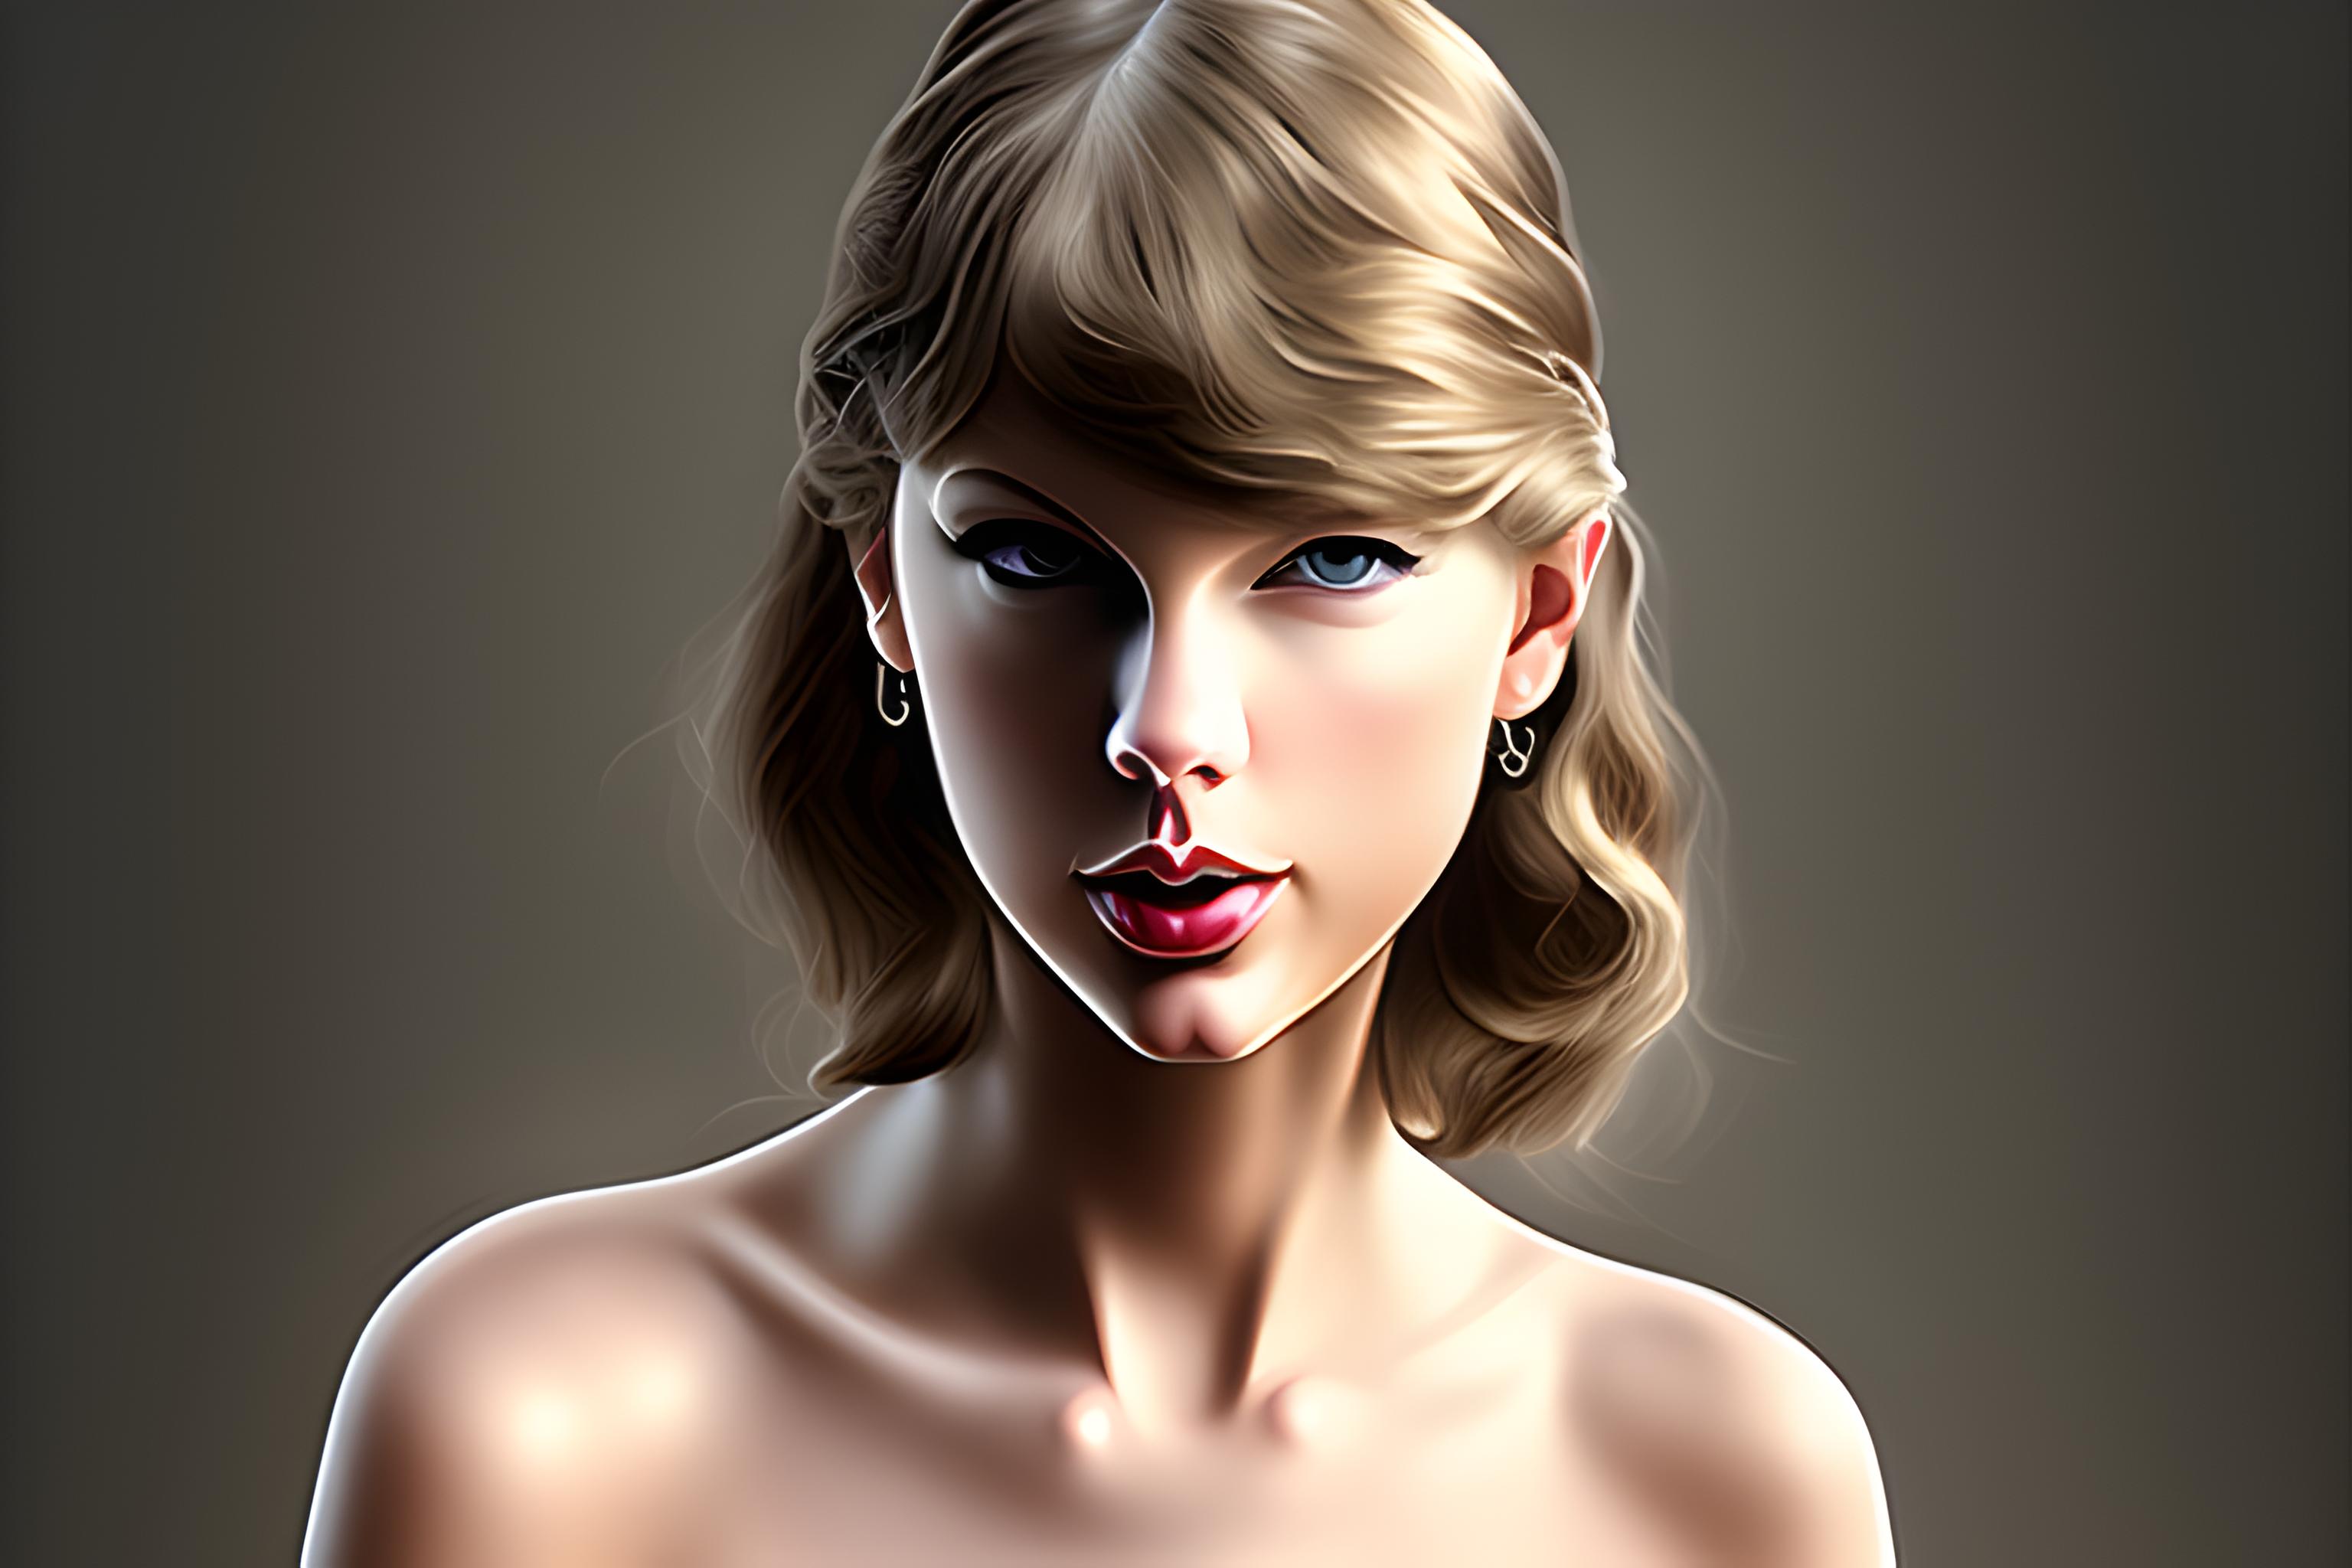 Taylor swift nude | Wallpapers.ai